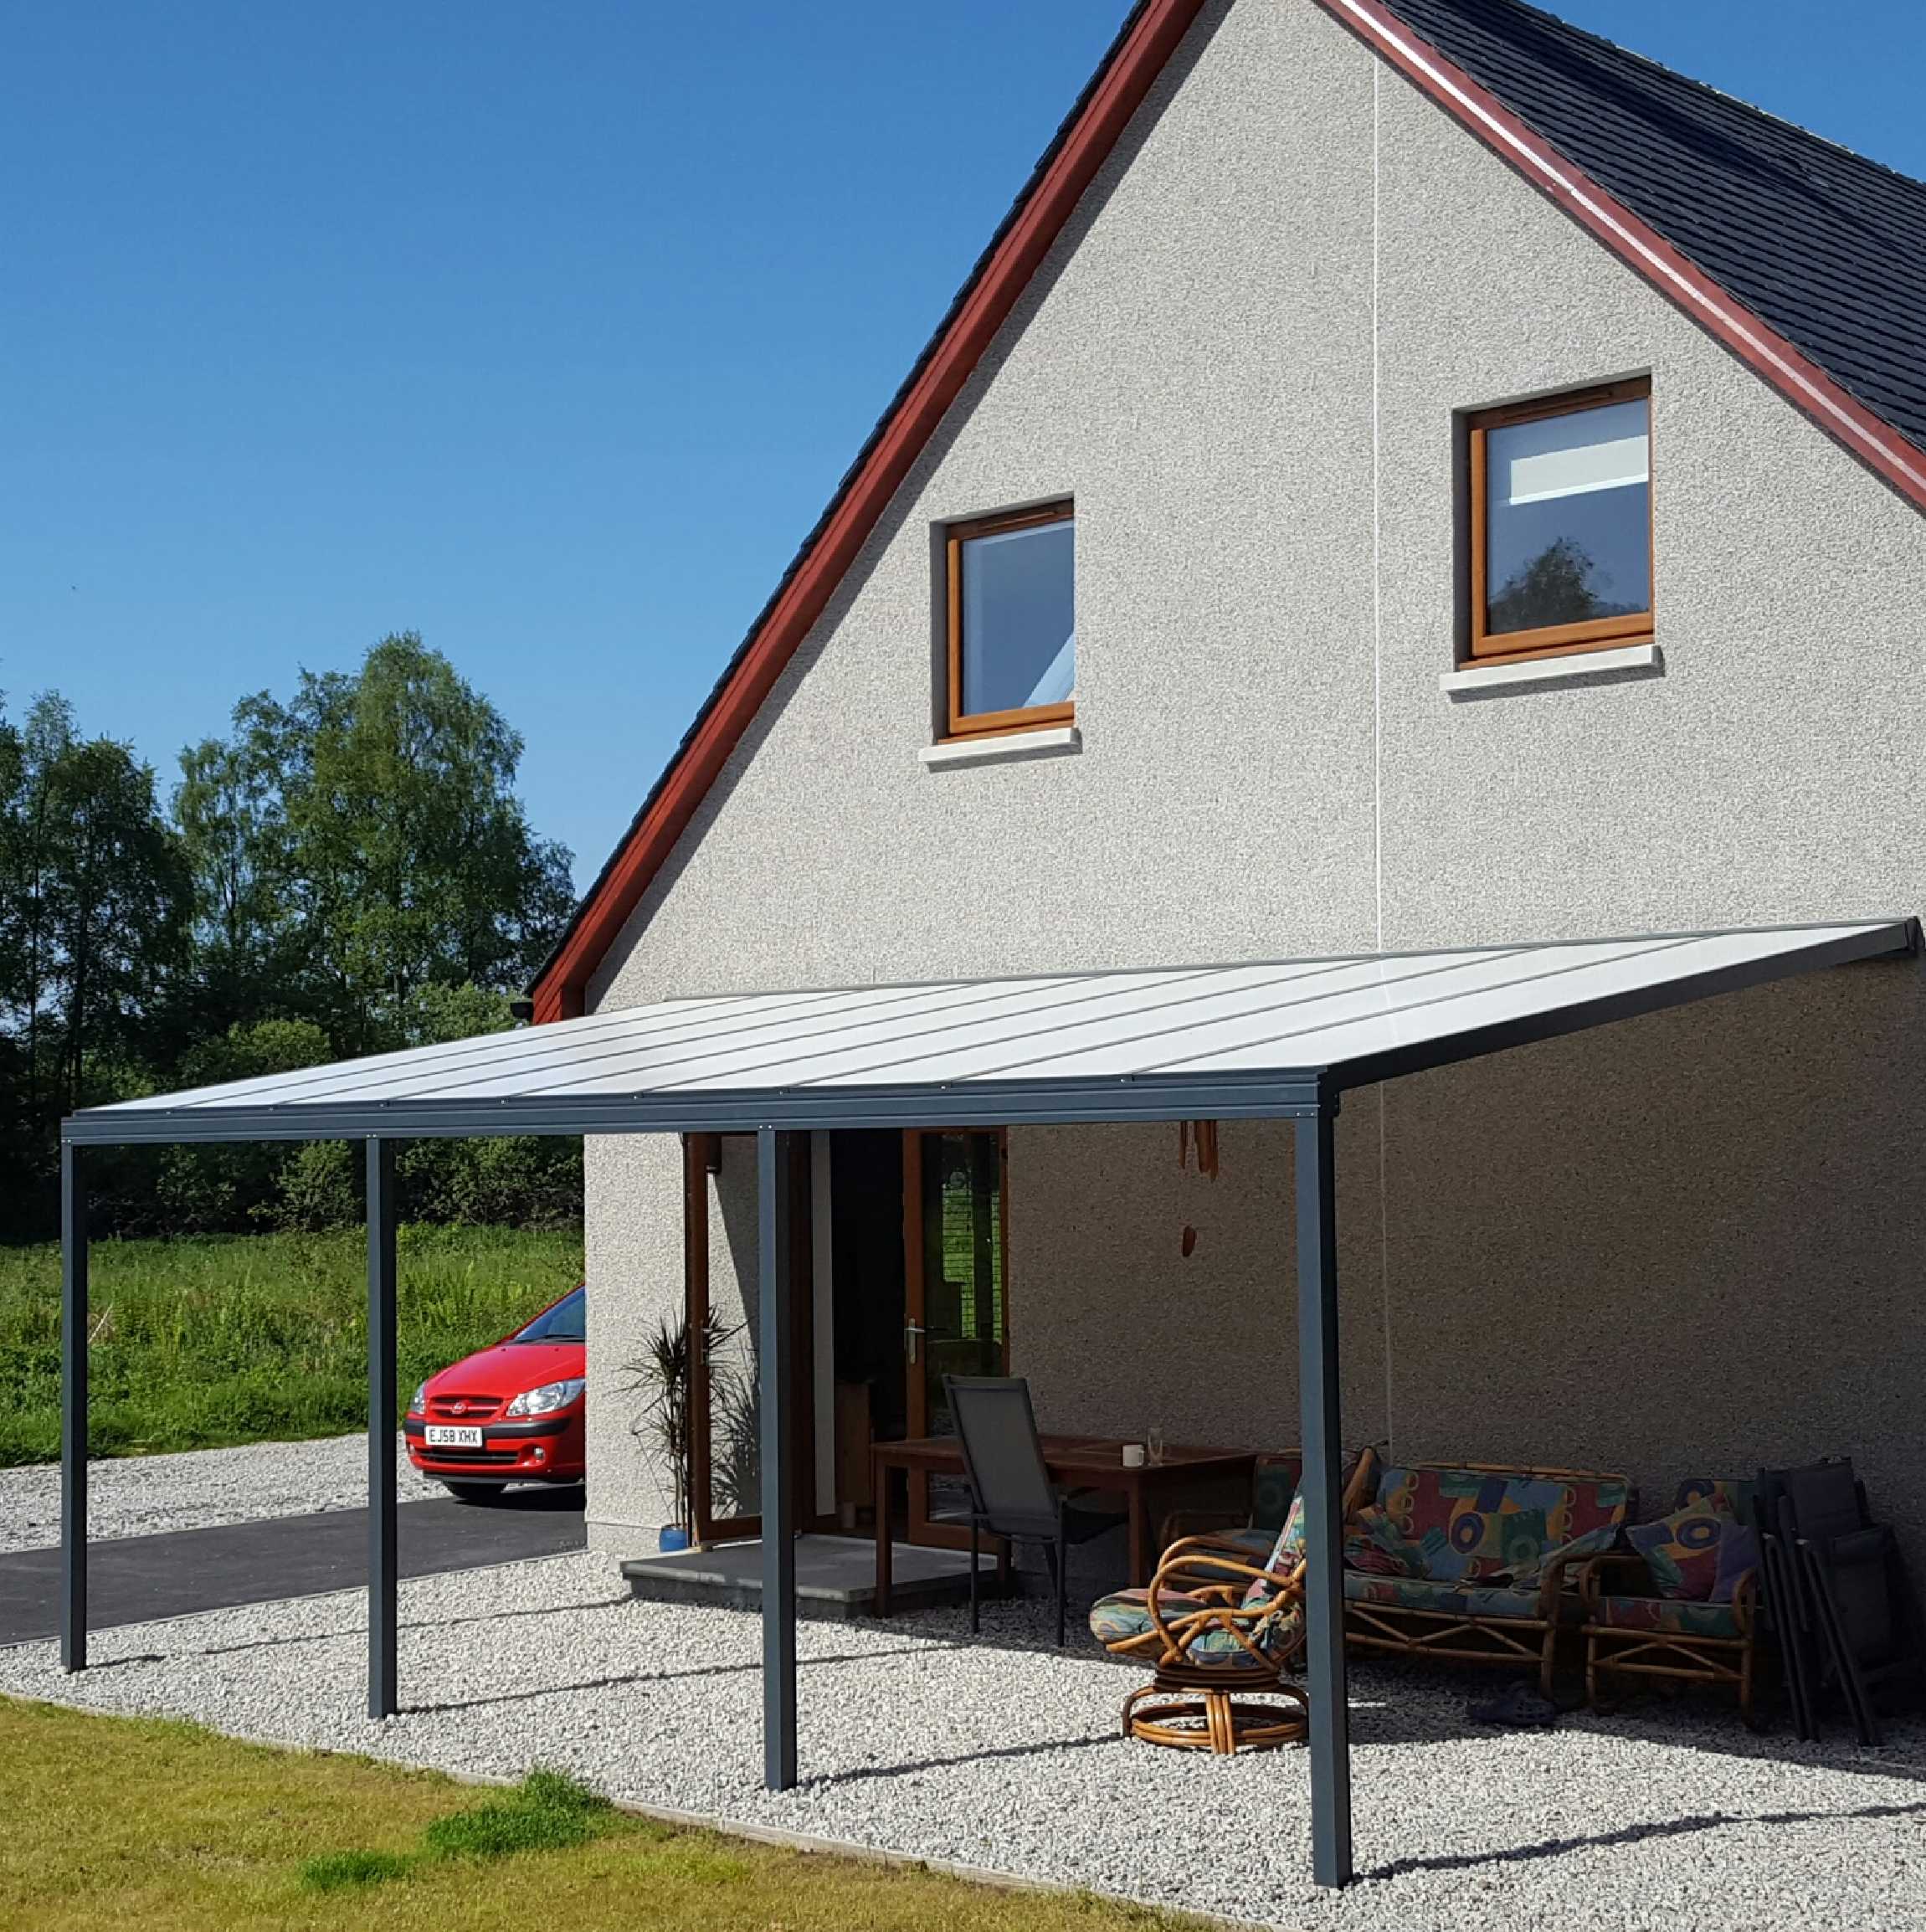 Great selection of Omega Smart Lean-To Canopy, Anthracite Grey, 16mm Polycarbonate Glazing - 6.3m (W) x 4.5m (P), (4) Supporting Posts